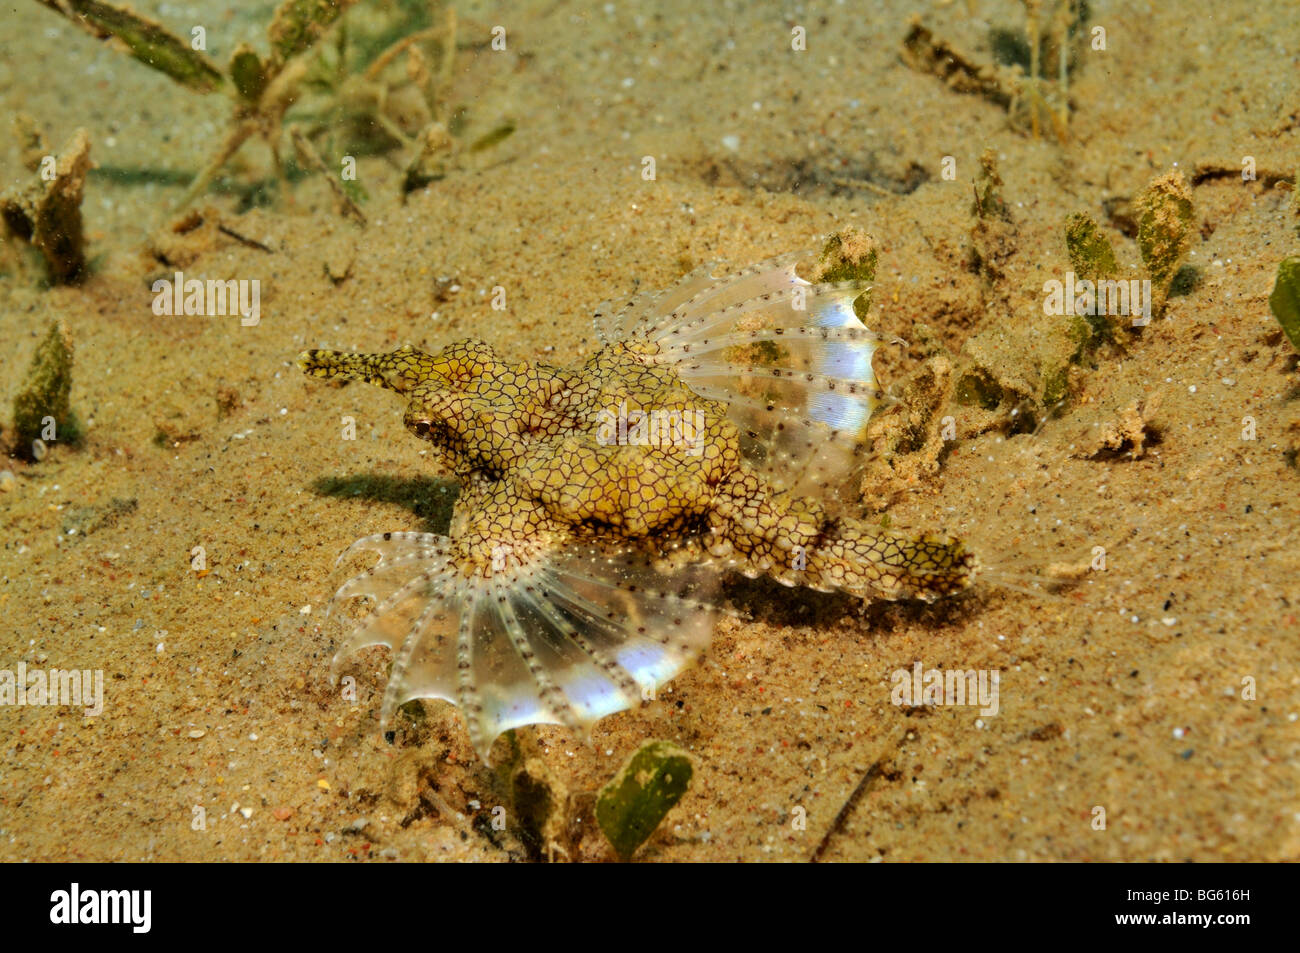 'Sea moth' or little dragonfish, Eurypegasus draconis on sandy seabed Stock Photo